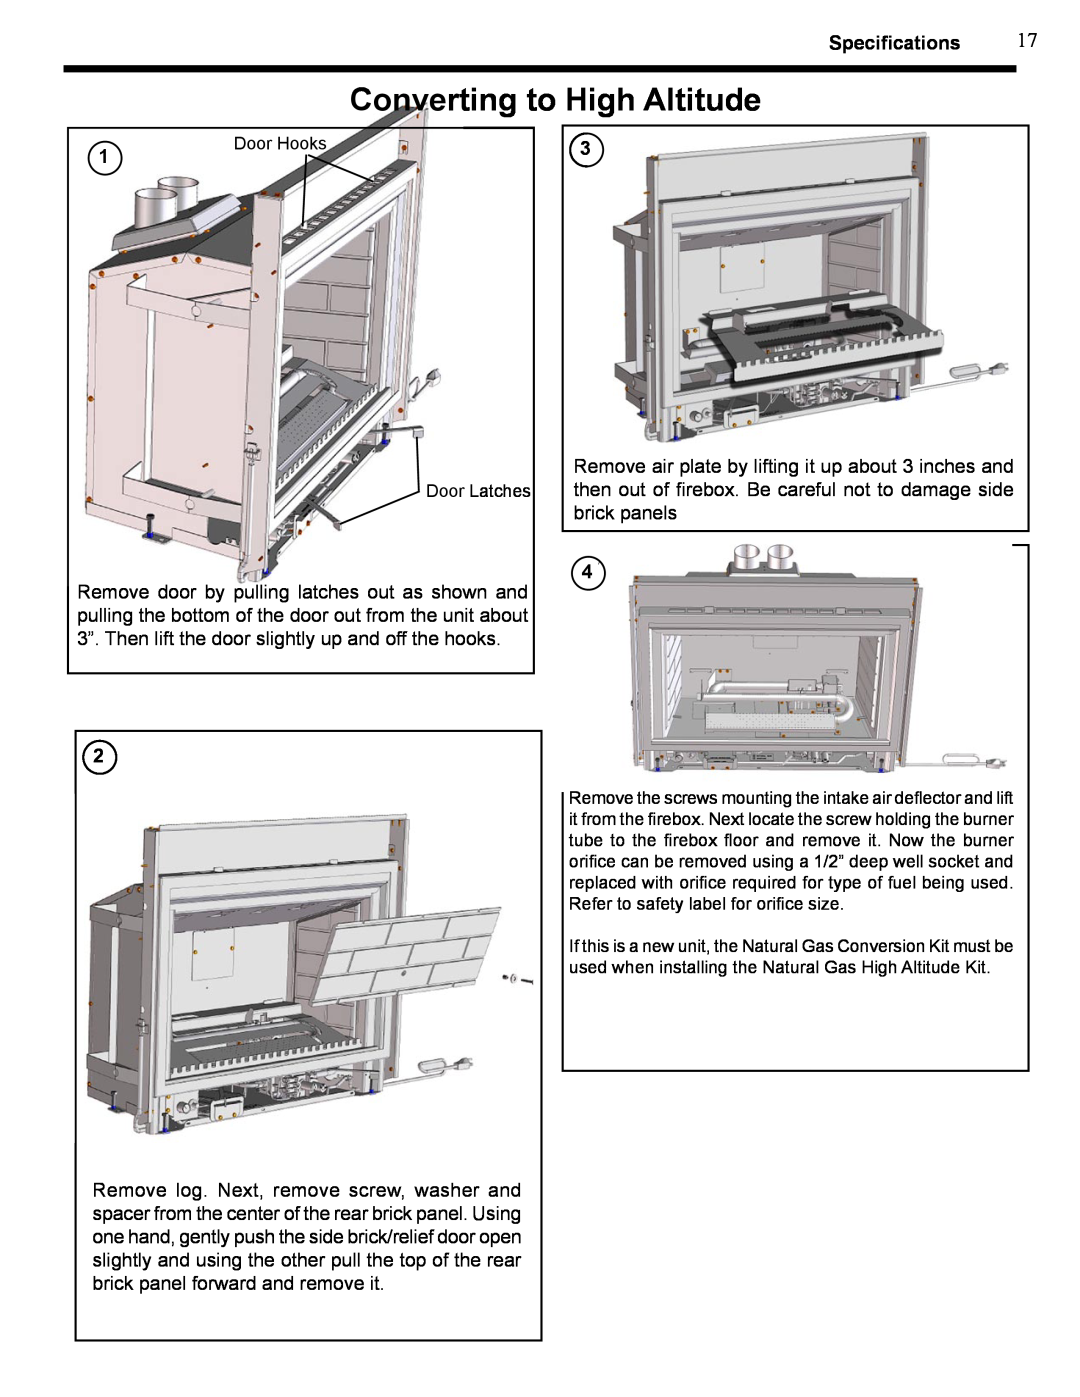 Harman Stove Company XL owner manual Converting to High Altitude, Speciﬁcations 